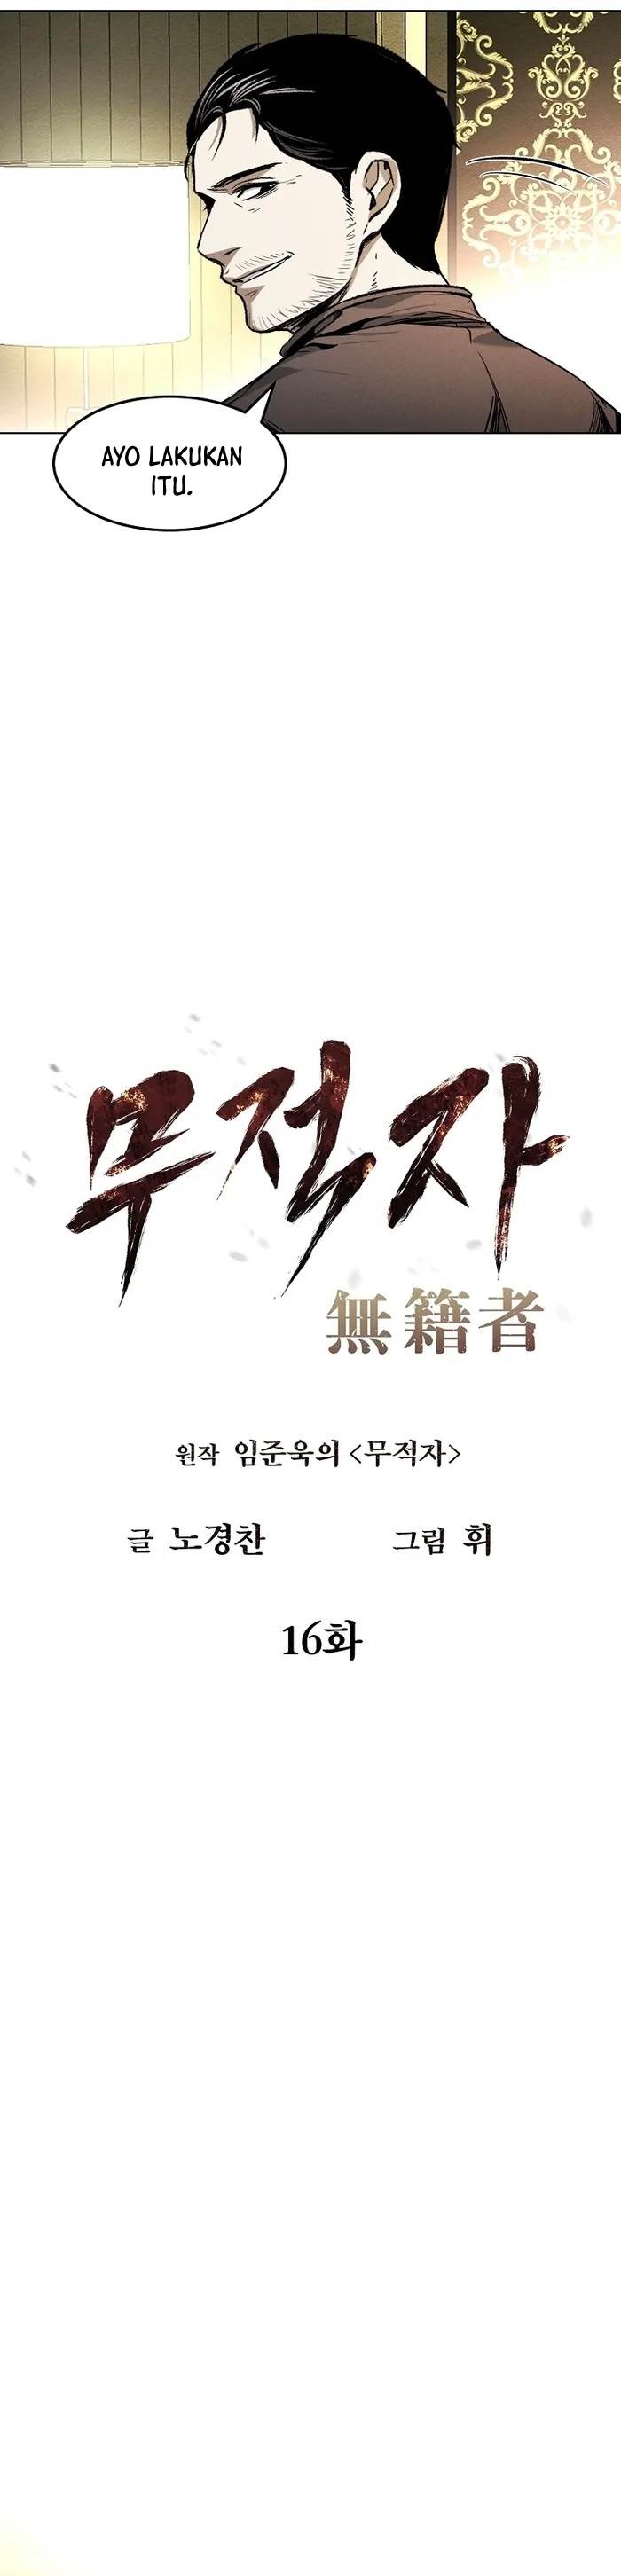 The Invincible Man Chapter 16